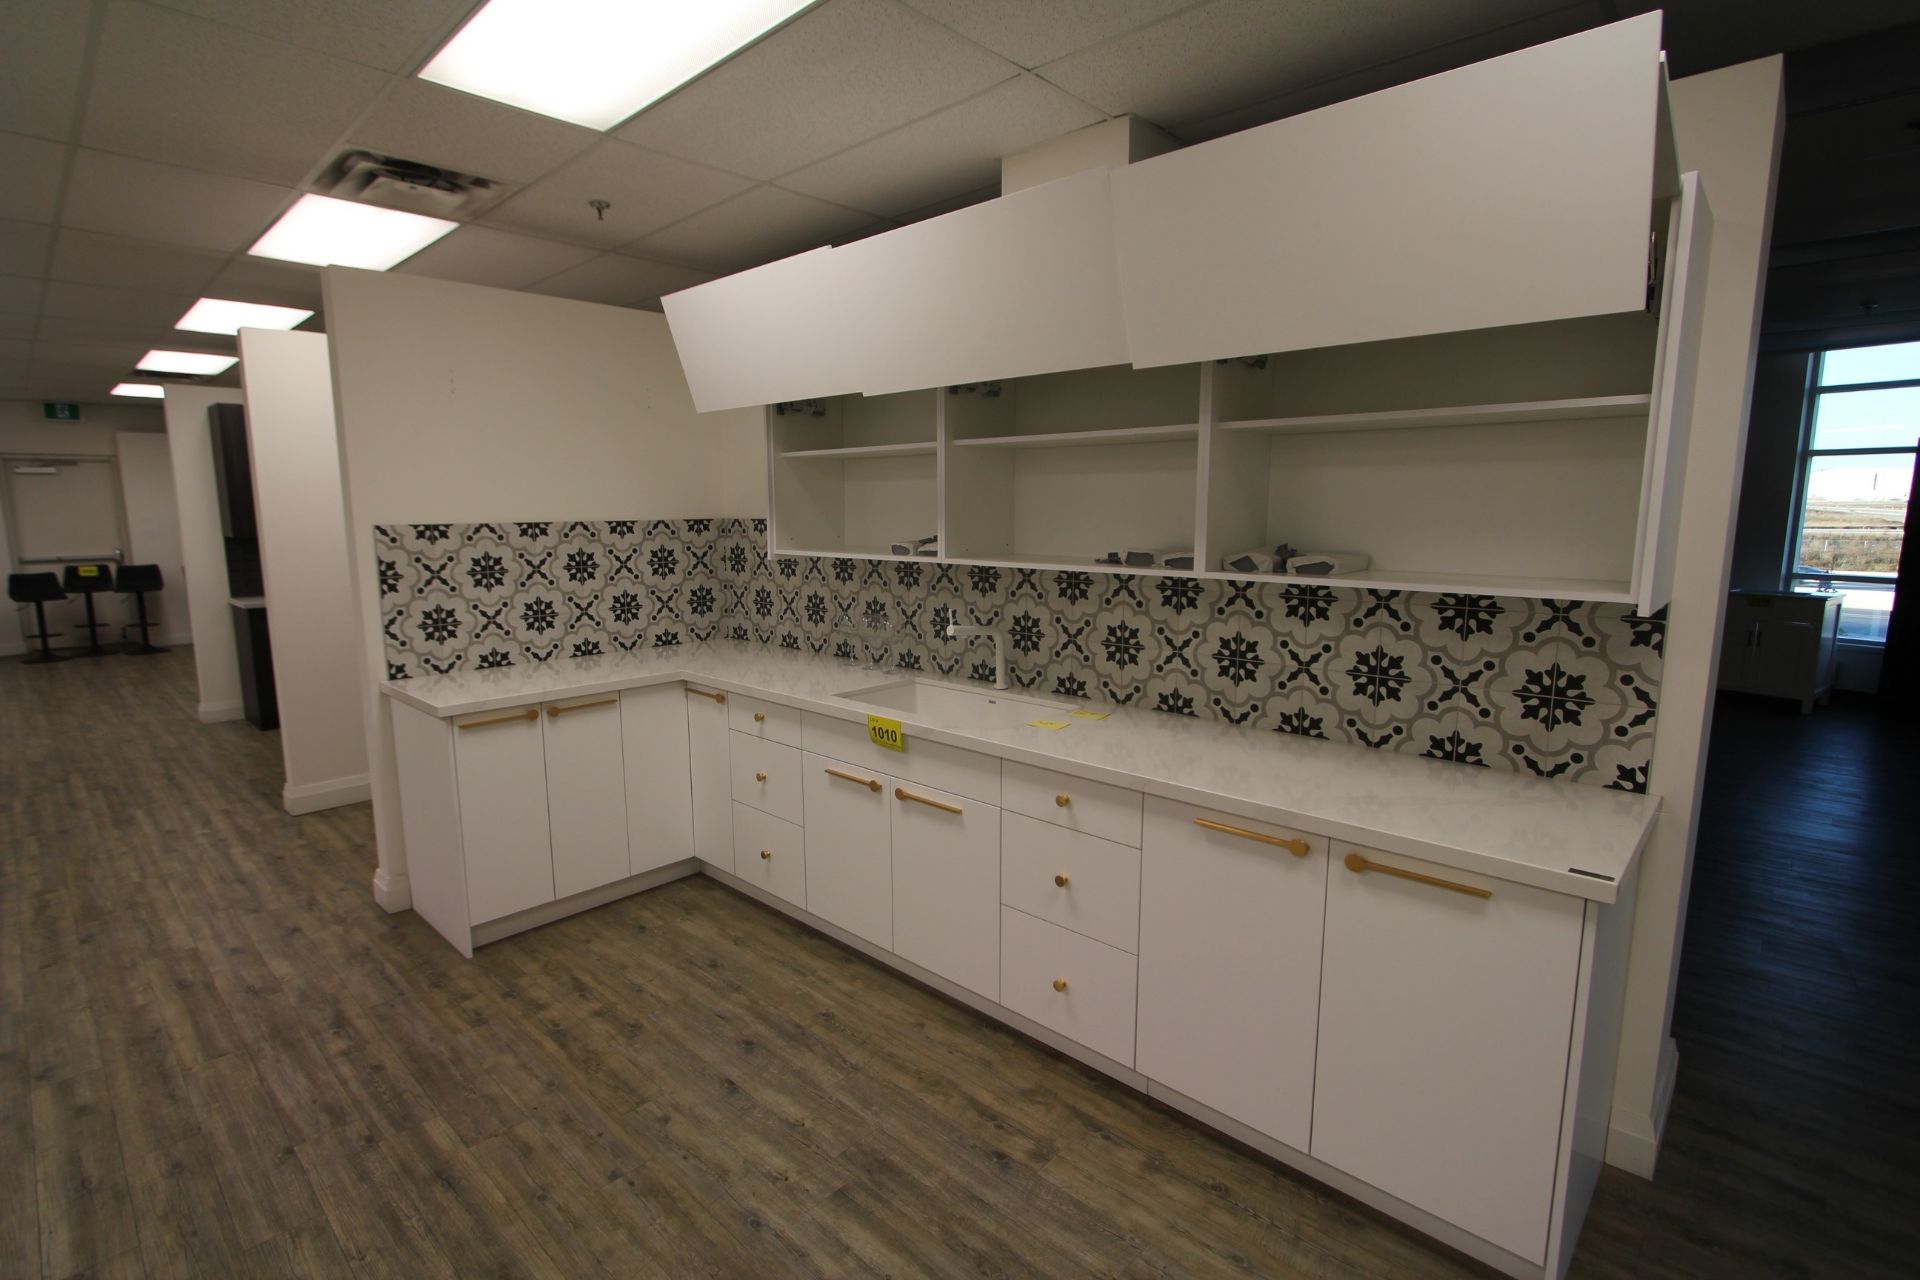 SHOWROOM DISPLAY KITCHEN, 145"L X 62"W, 17" X 30" SINK W/ CABINETRY, COUNTERTOP, SINK, FAUCET, - Image 3 of 7